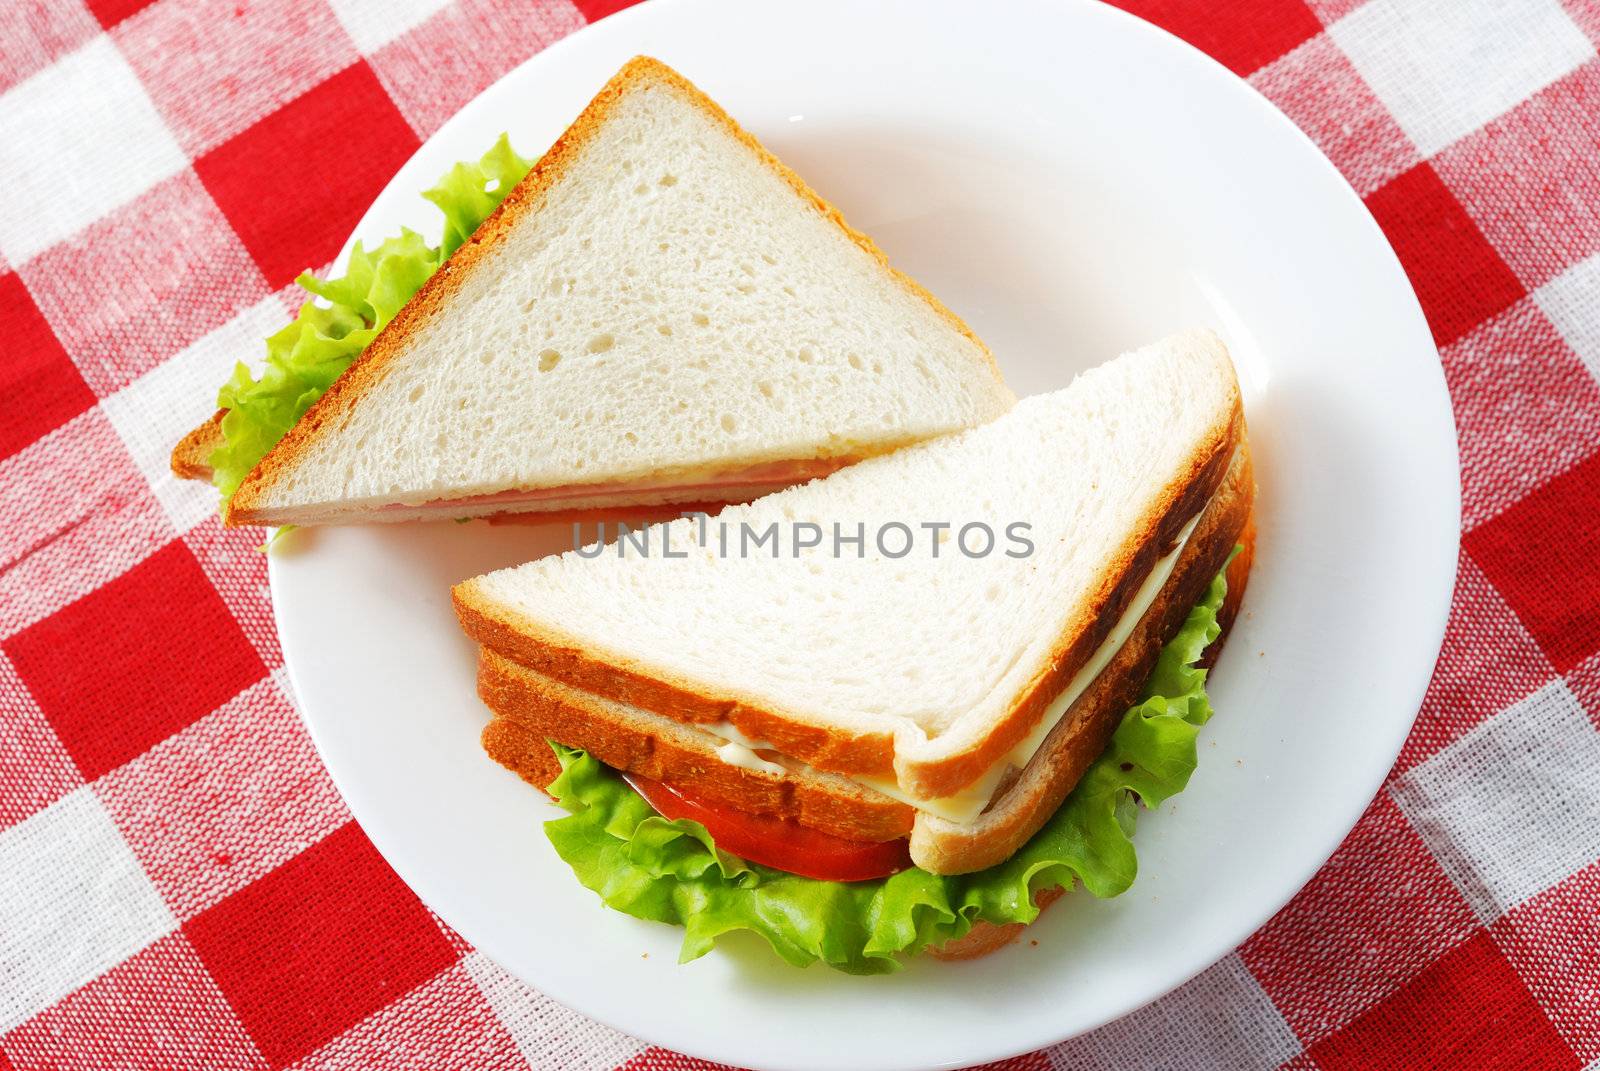 Two sandwiches on a plate